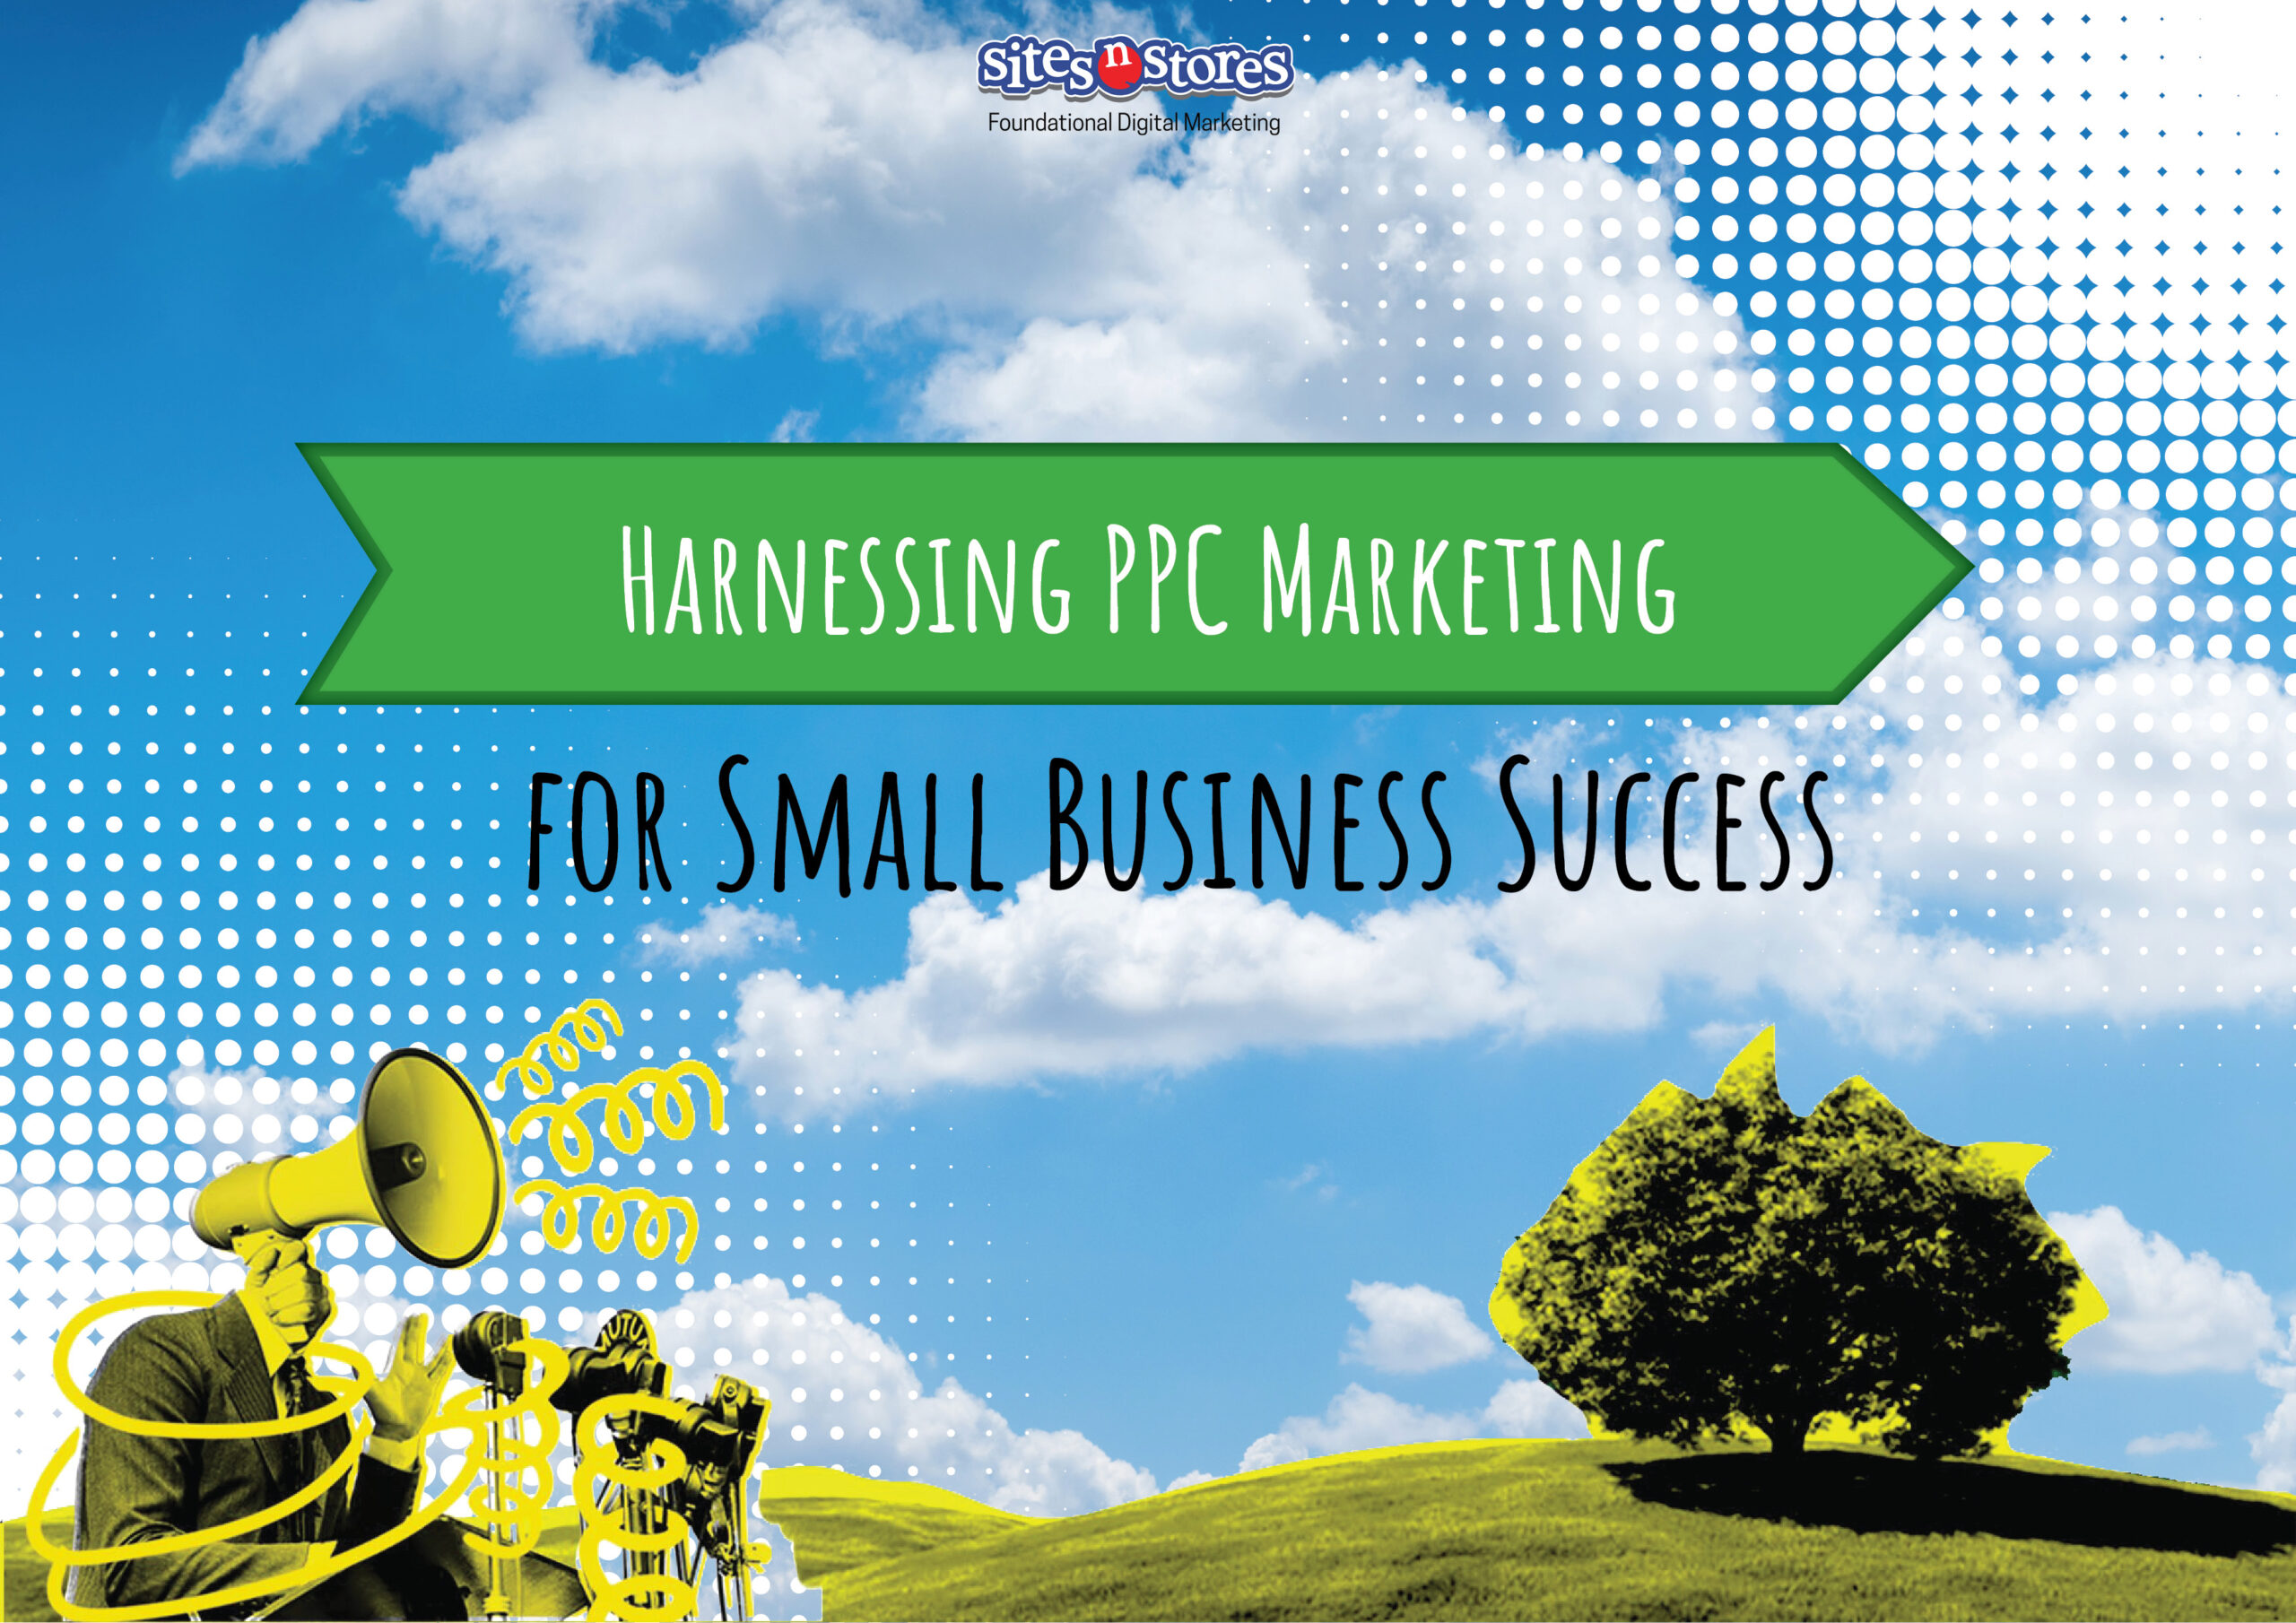 Harnessing PPC Marketing for Small Business Success